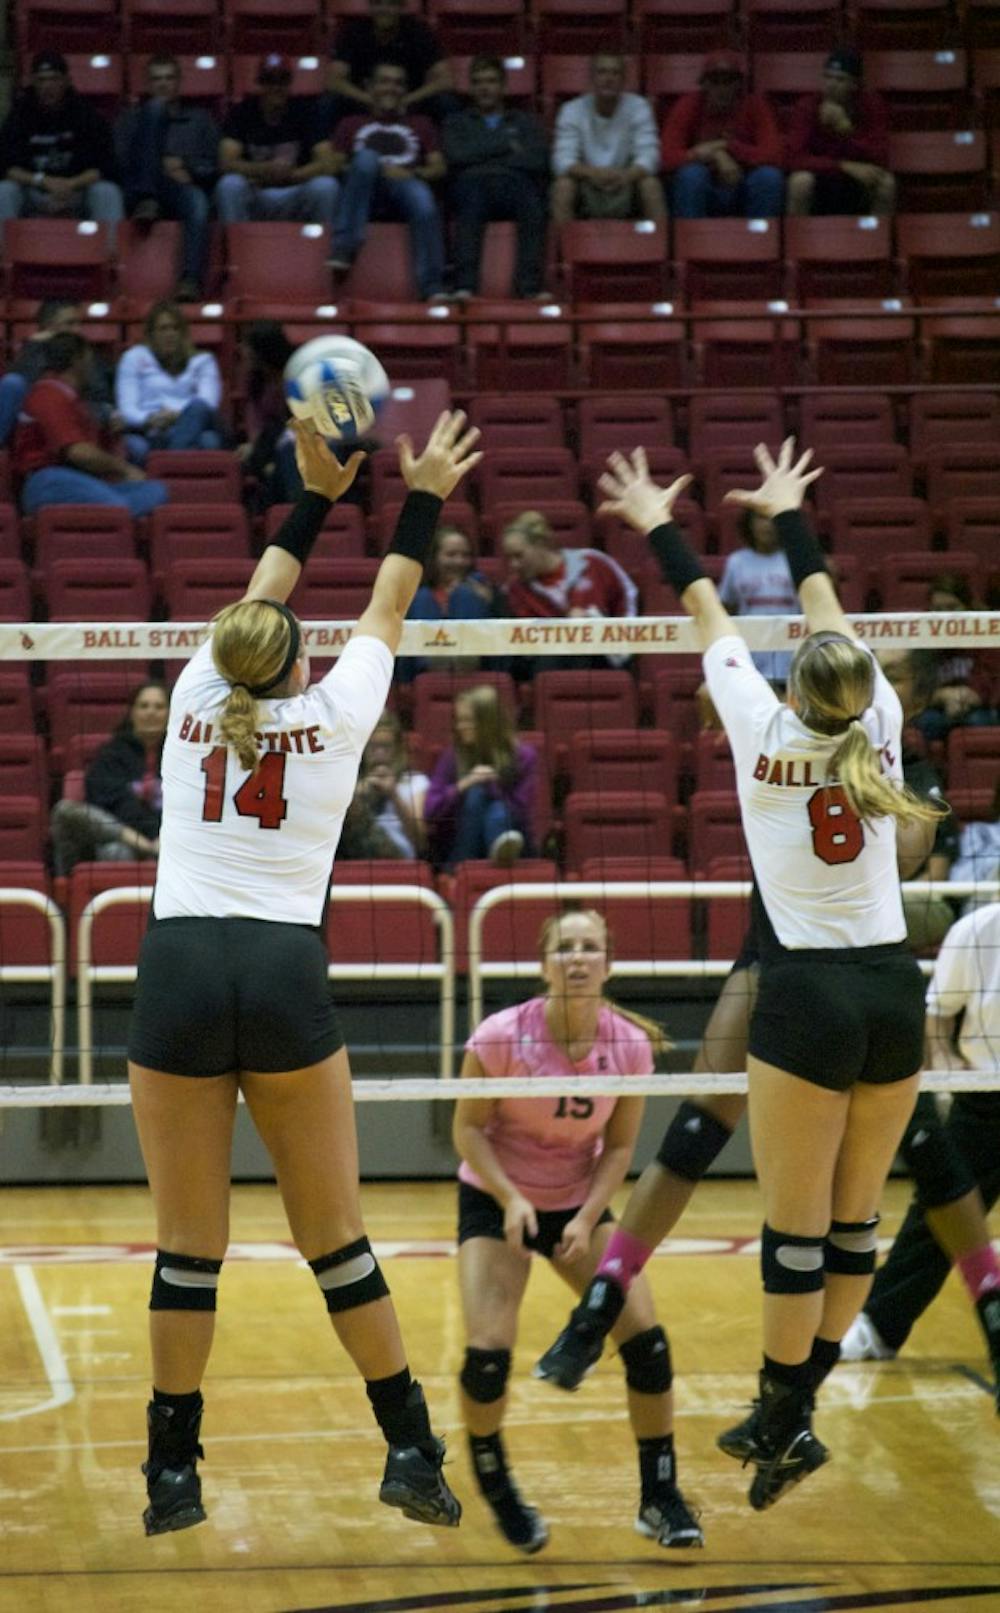 Senior middle hitter Kelly Hopkins and freshman outside hitter Jessica Lindsey jump up to block a ball from opponent Eastern Michigan on Oct. 3 at Worthen Arena. DN PHOTO SAMANTHA BRAMMER